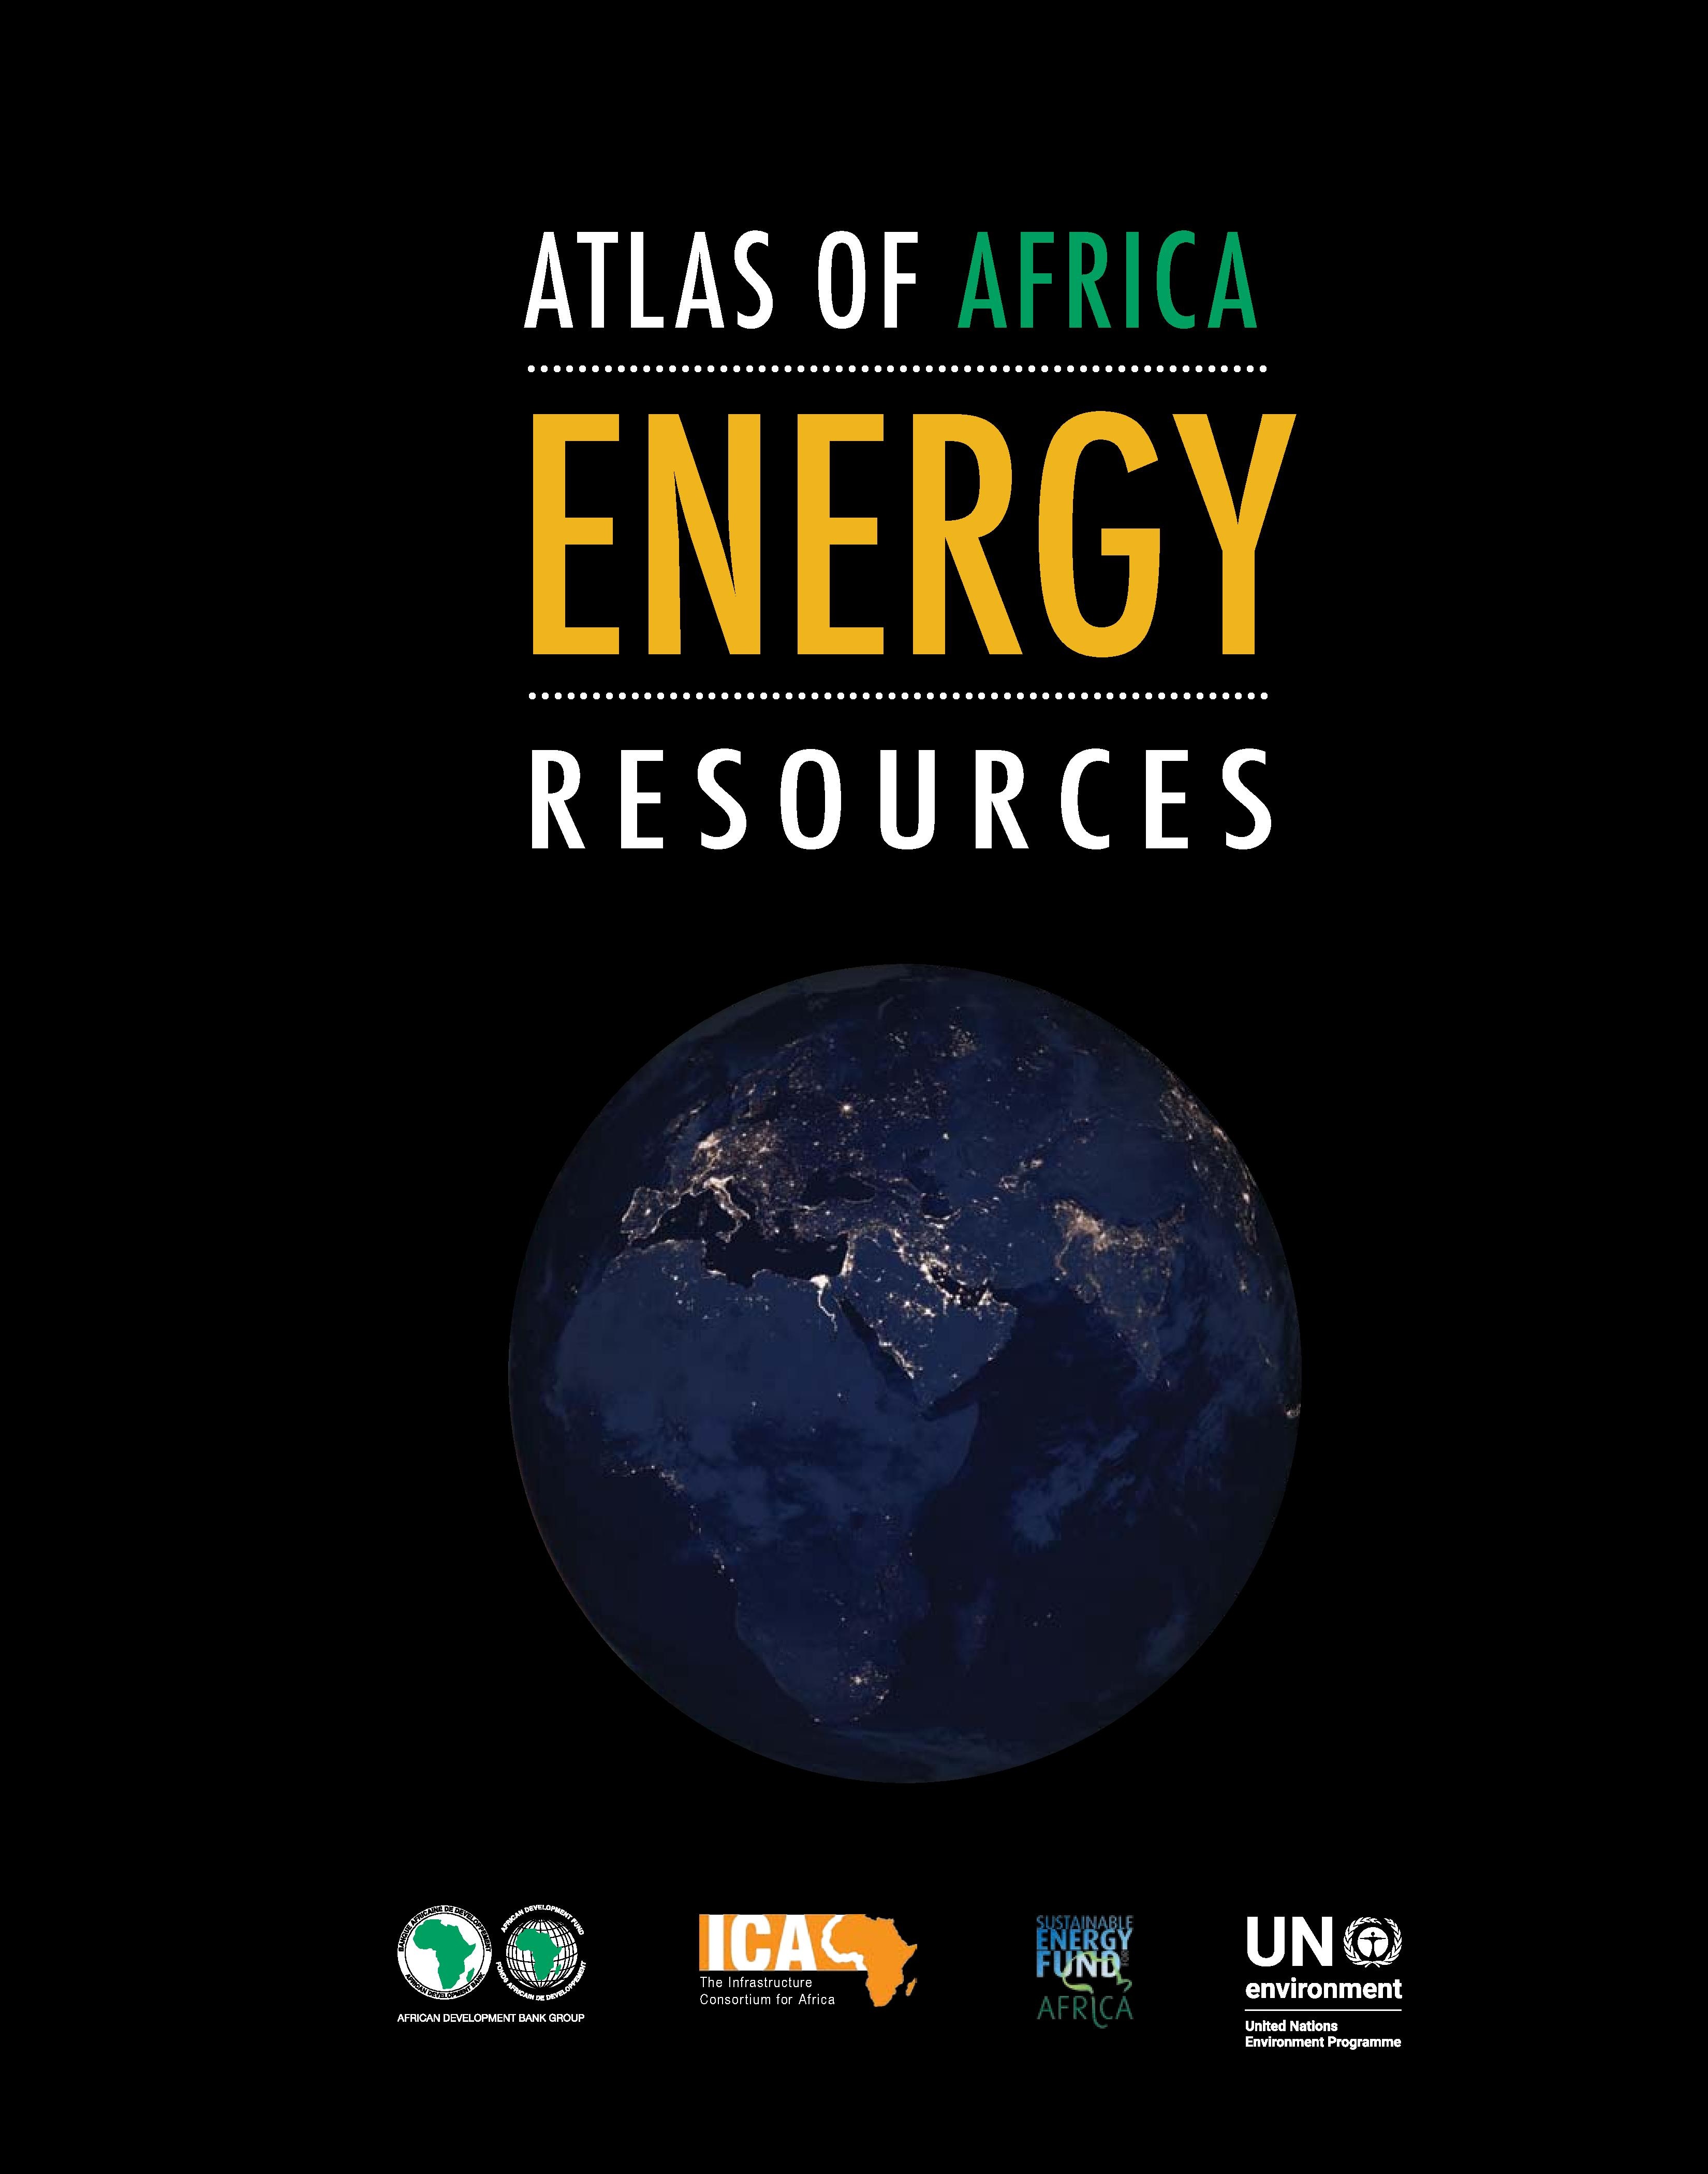 Atlas of Africa Energy Resources